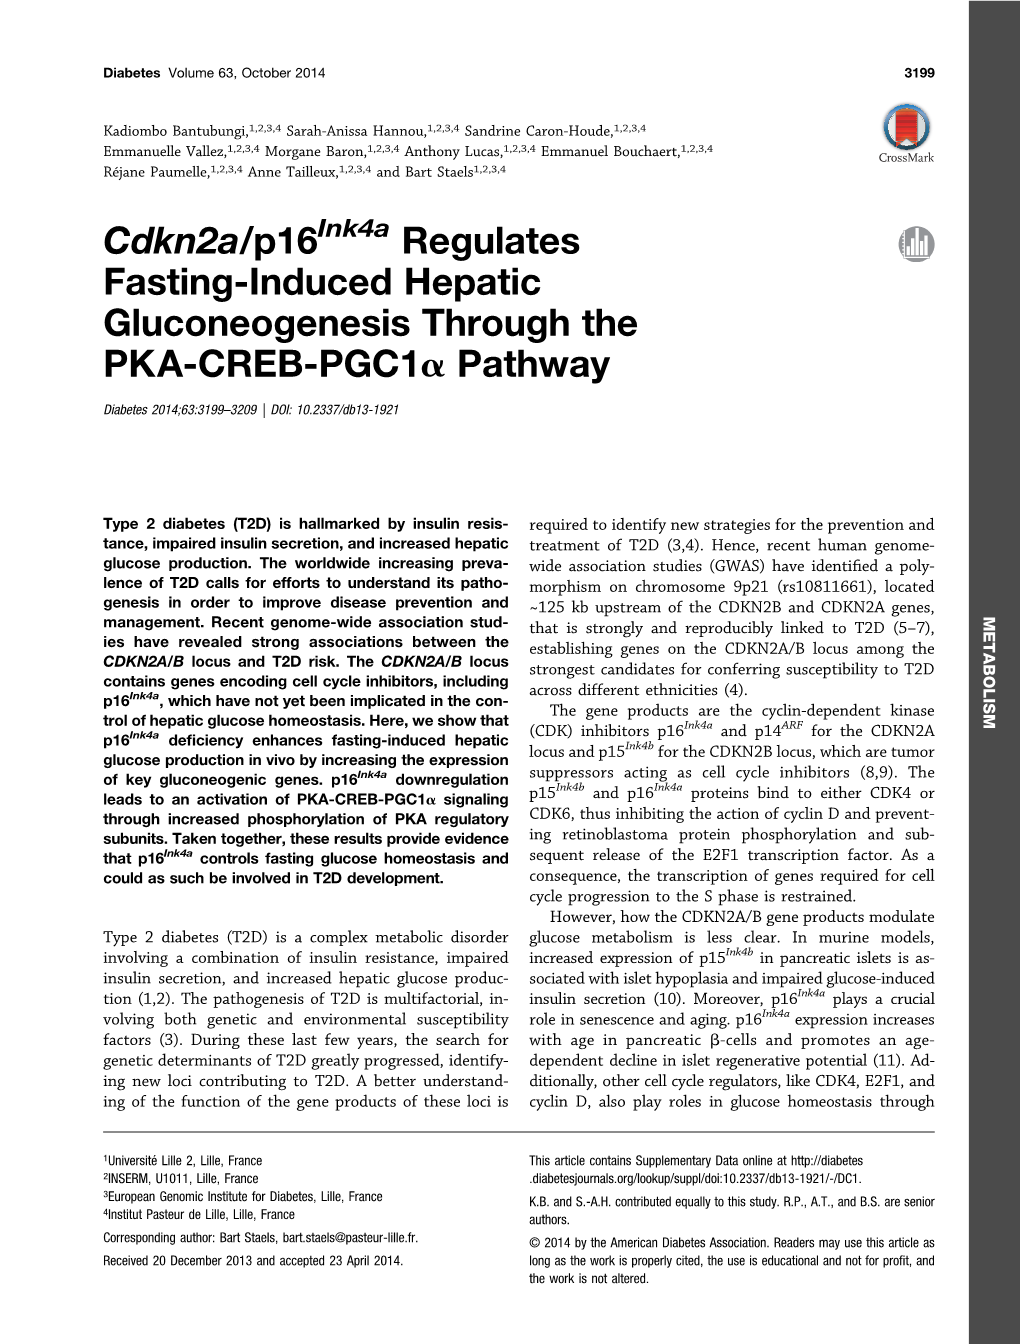 Cdkn2a/P16 Regulates Fasting-Induced Hepatic